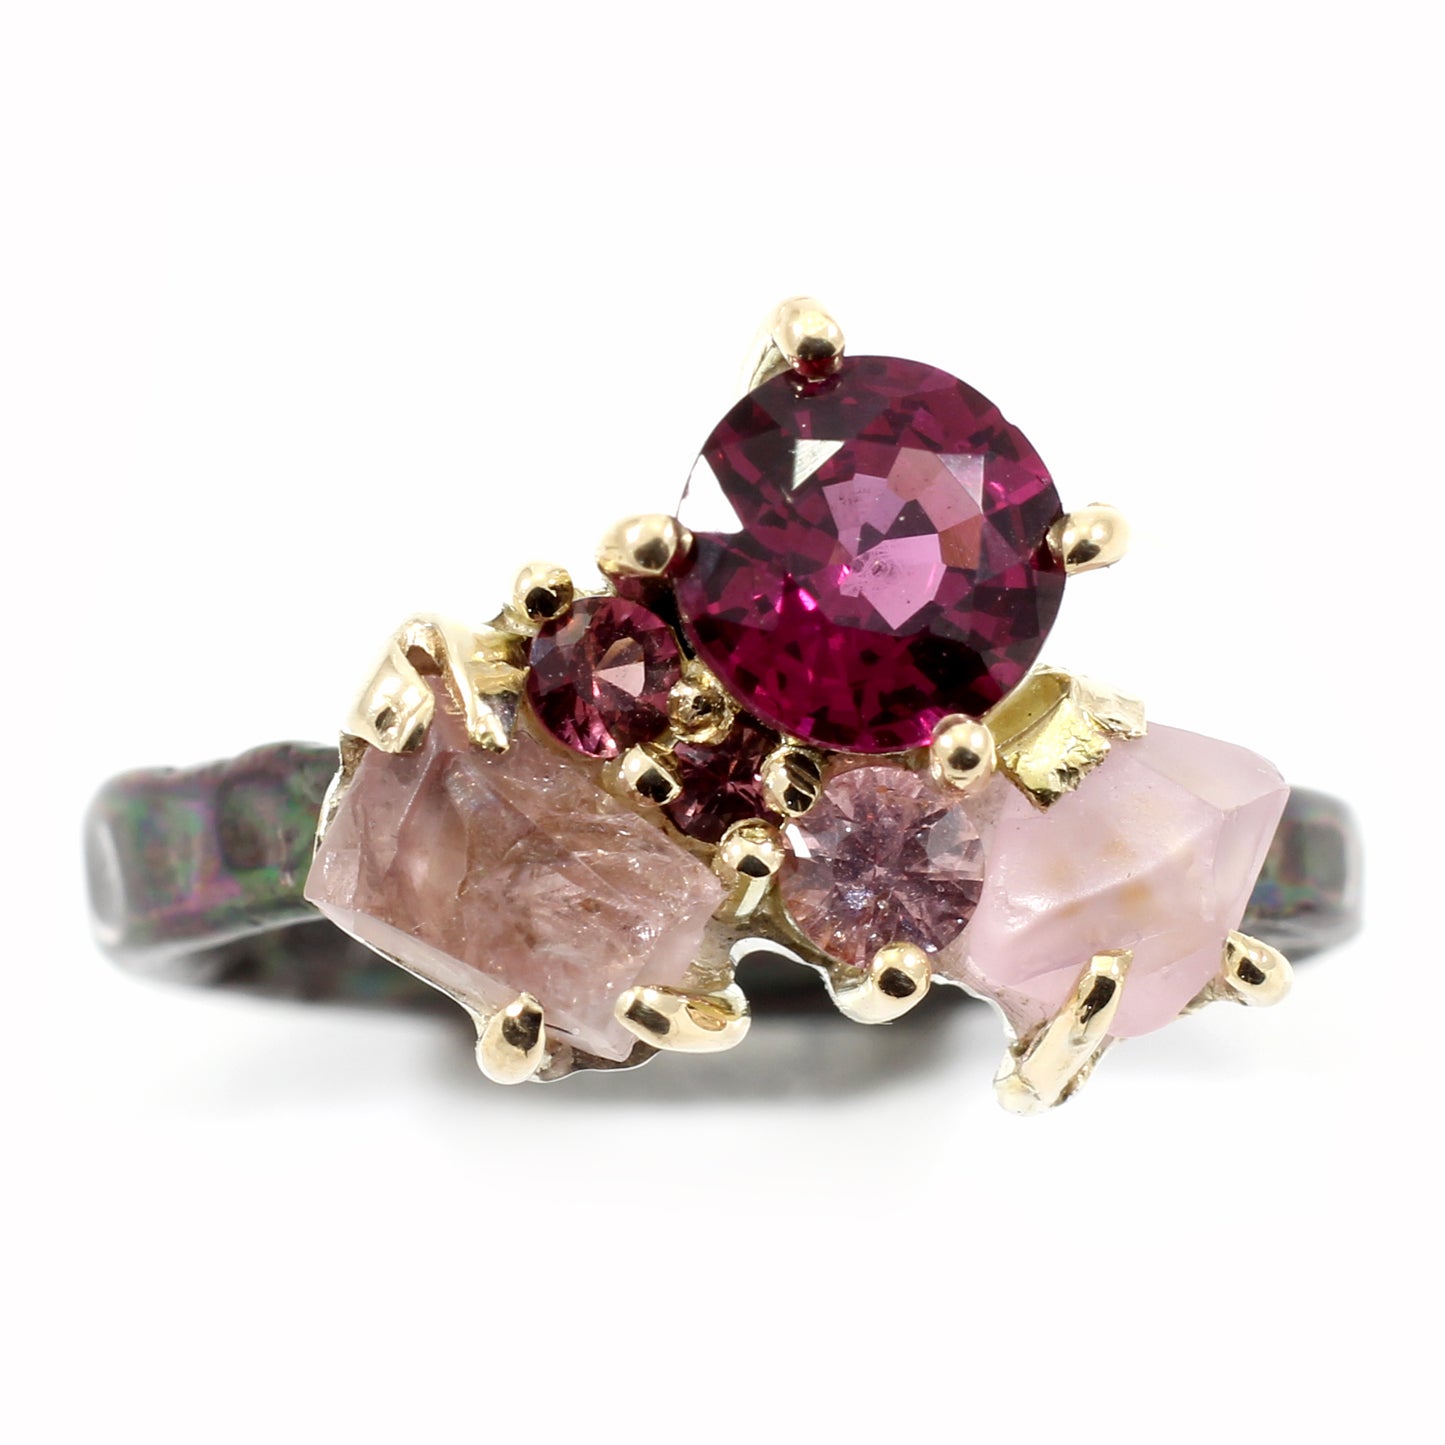 The Kate Ring - Garnet and sapphire cluster ring in textured gold and silver